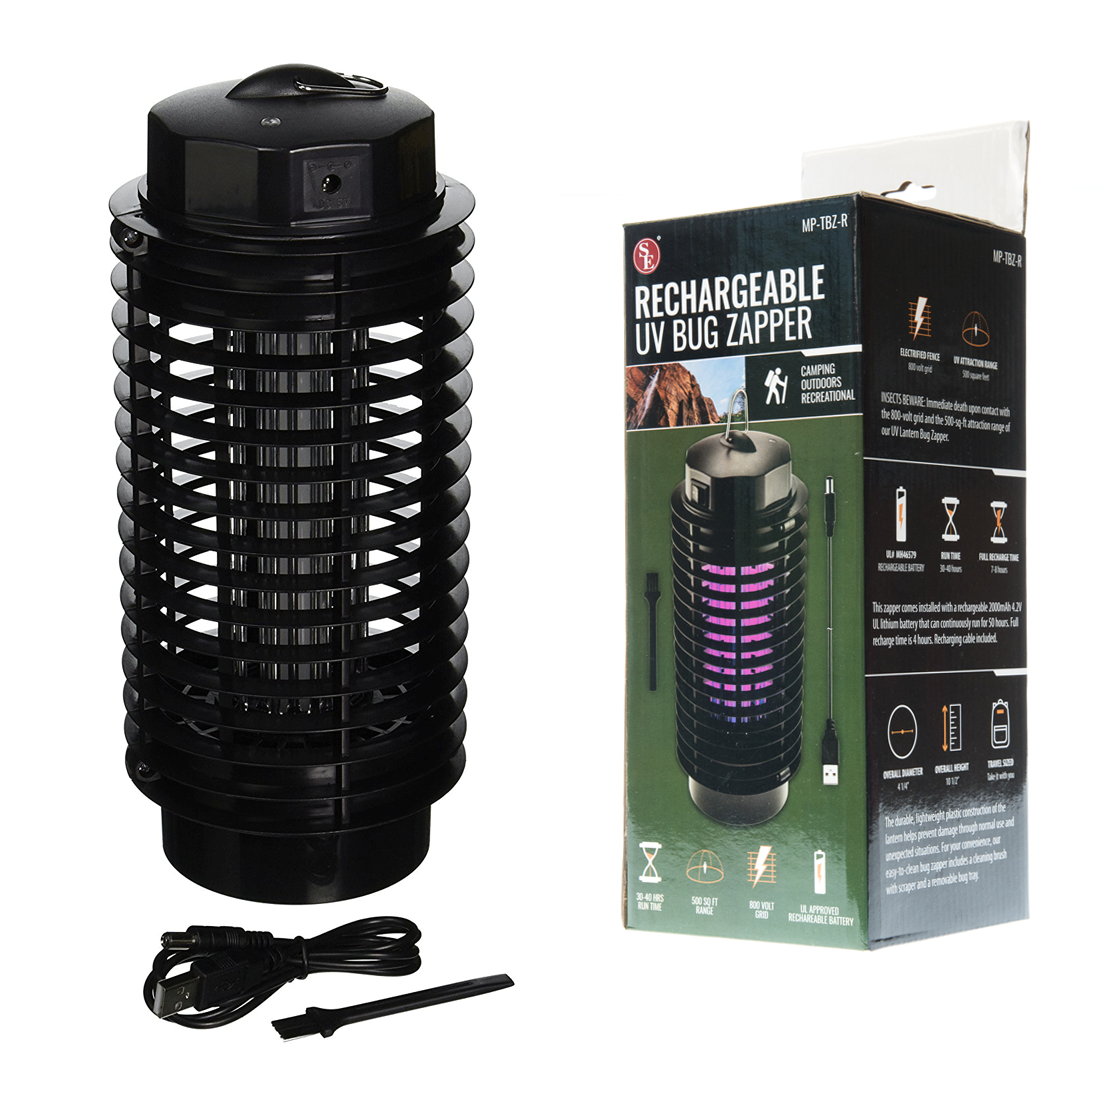 Rechargeable UV Bug Zapper - 50 hours (1 pc)